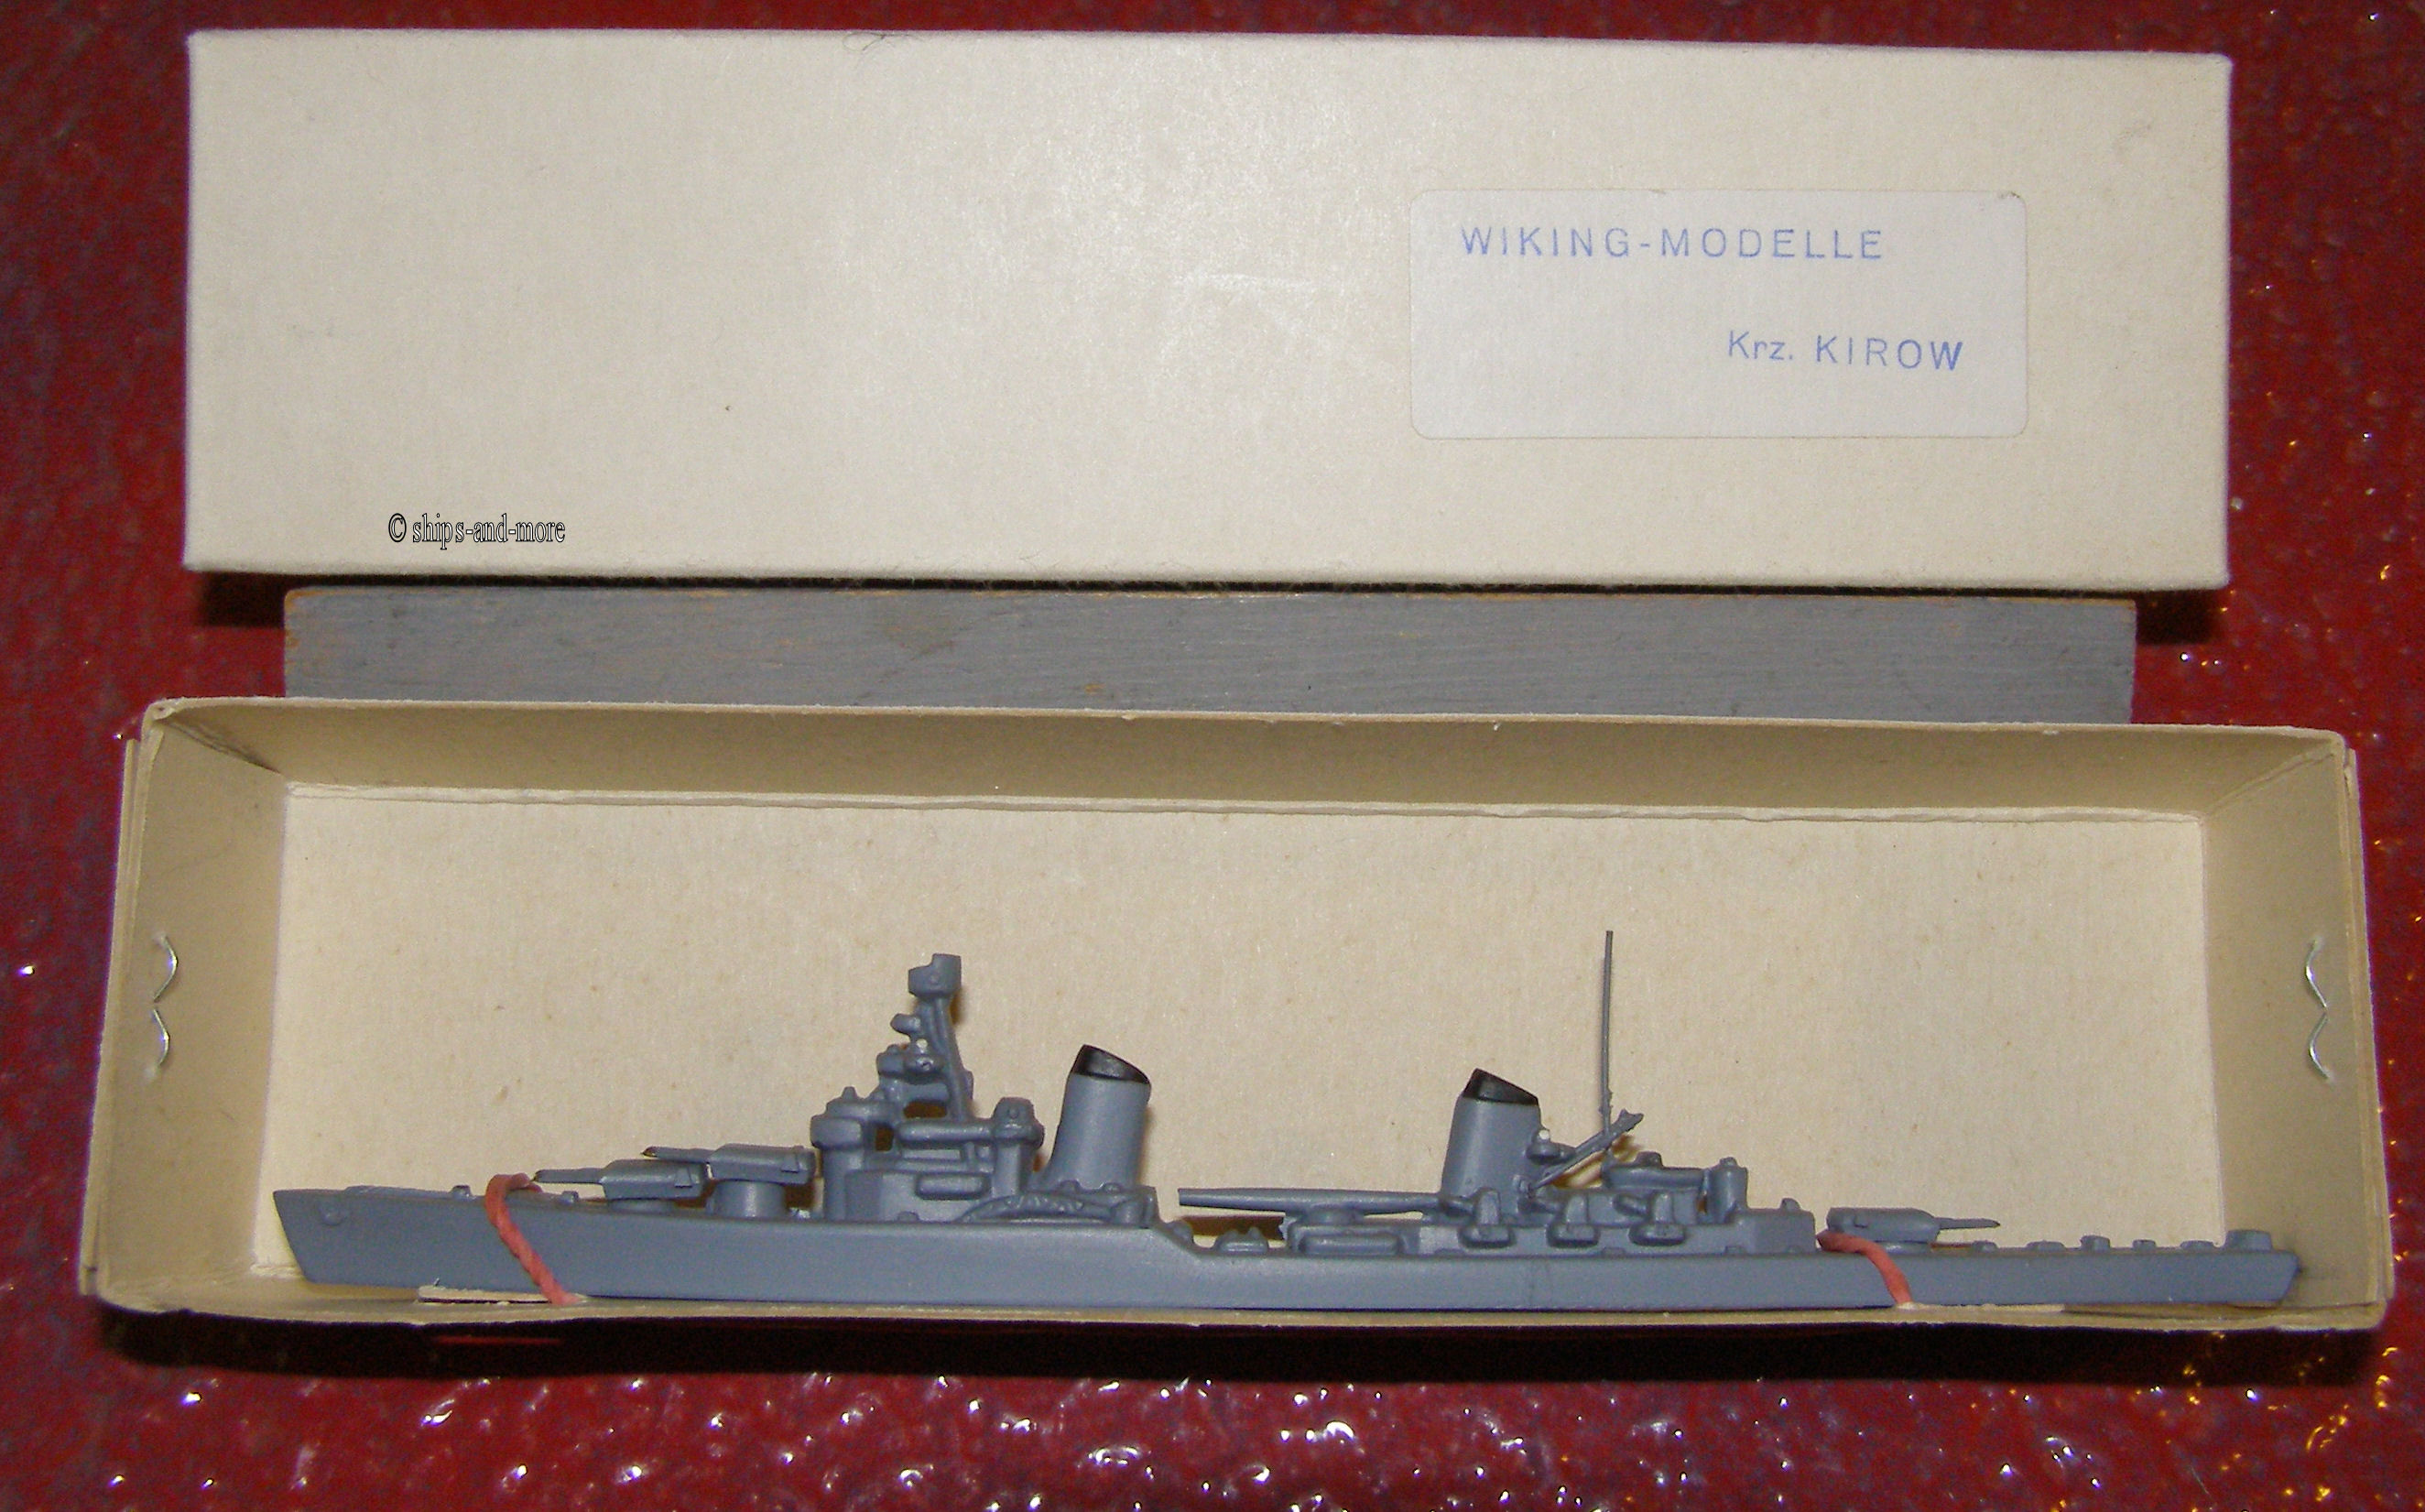 Vintage 1:1250 Wiking soviético crucero kirow Russian Cruiser impecable 